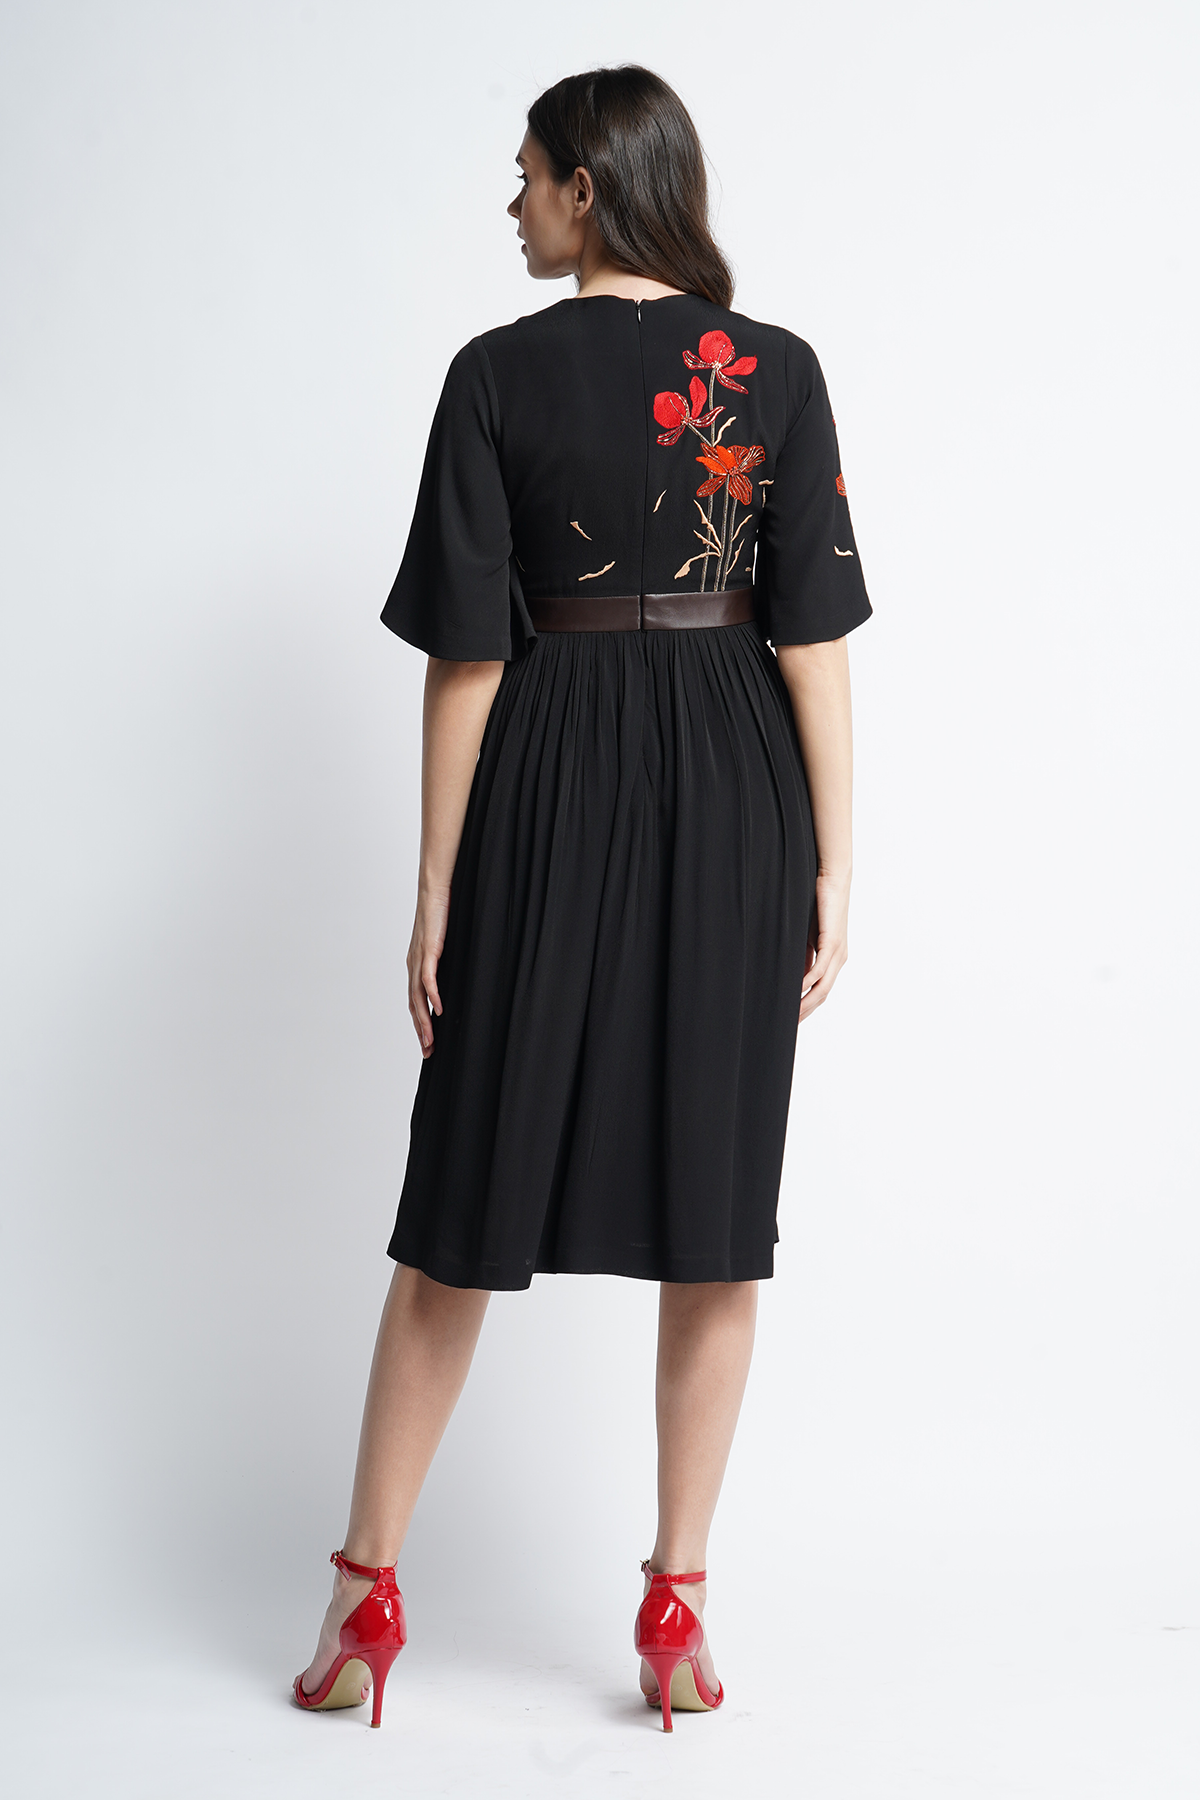 Blooming Flower Midi Dress With Leather Belt